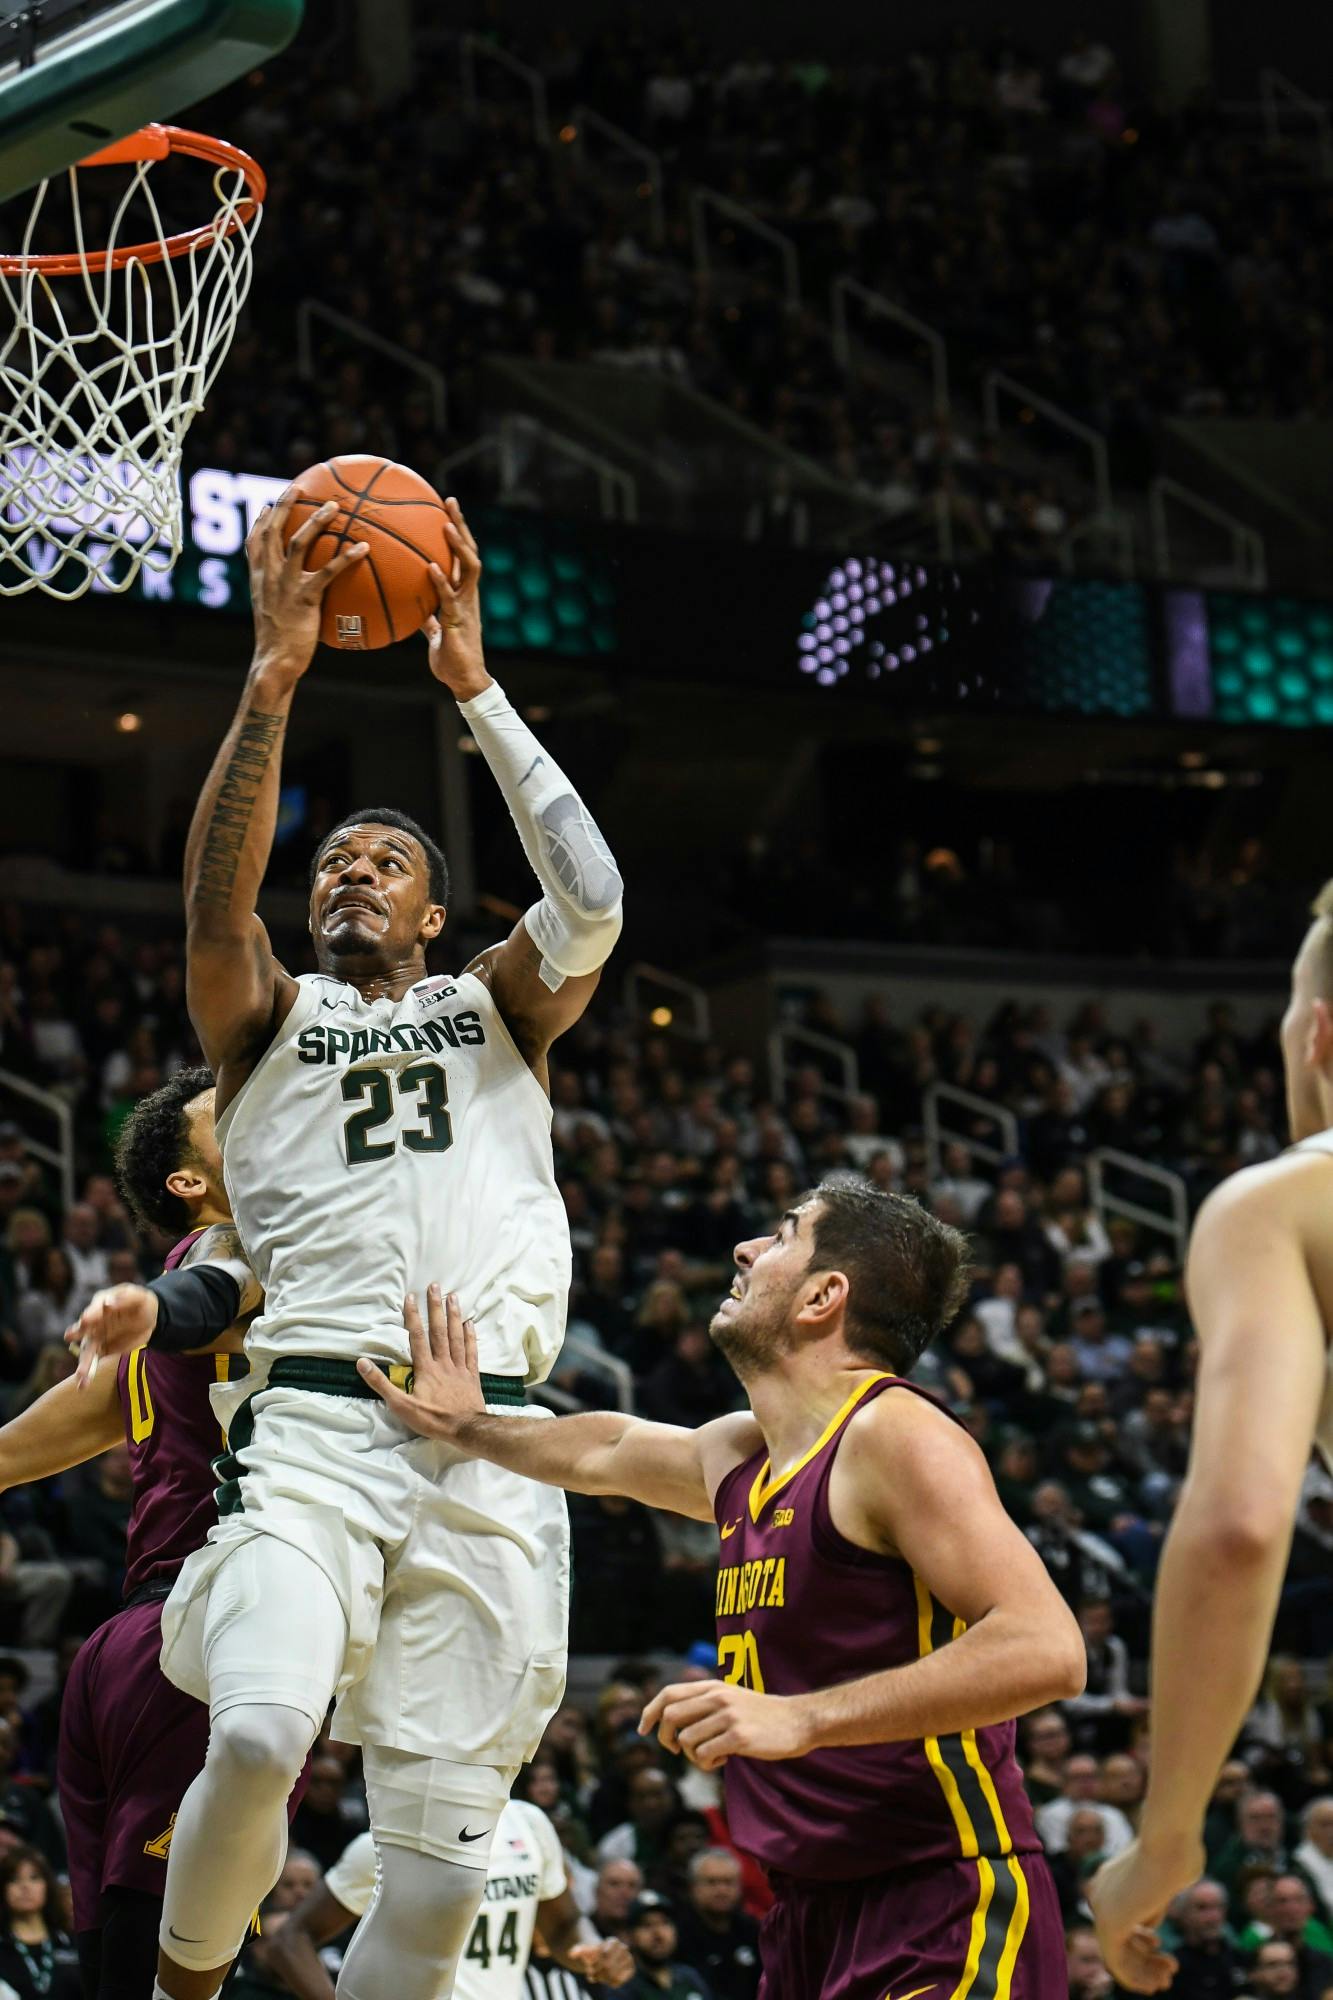 <p>Junior forward Xavier Tillman (23) makes a layup during the game against Minnesota at the Breslin Center on Jan. 9, 2020. The Spartans defeated the Golden Gophers 74-58.</p>